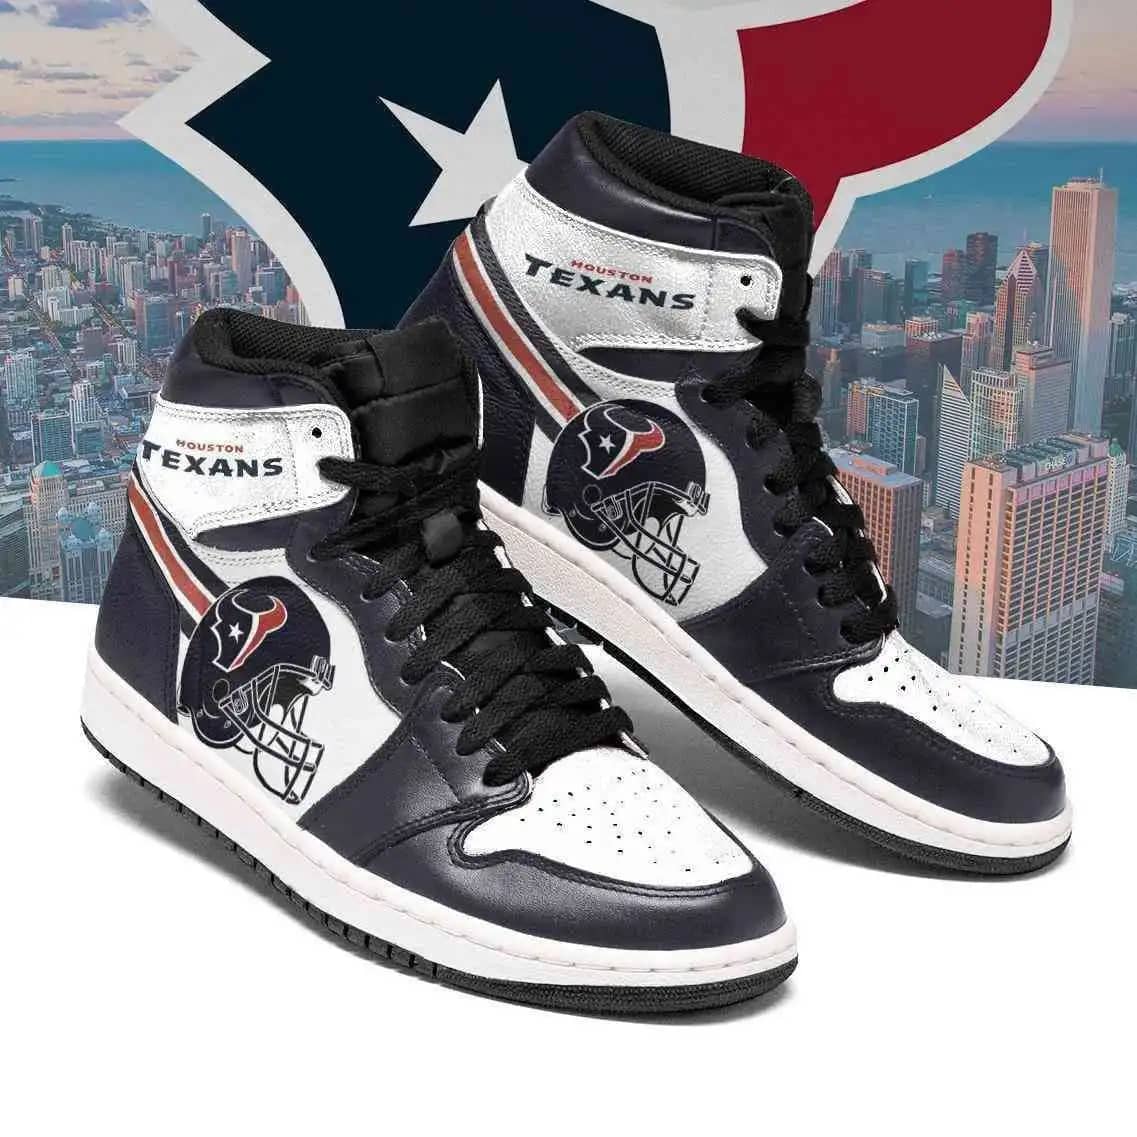 Houston Texans Nfl Football Perfect Gift For Fans Air Jordan Shoes